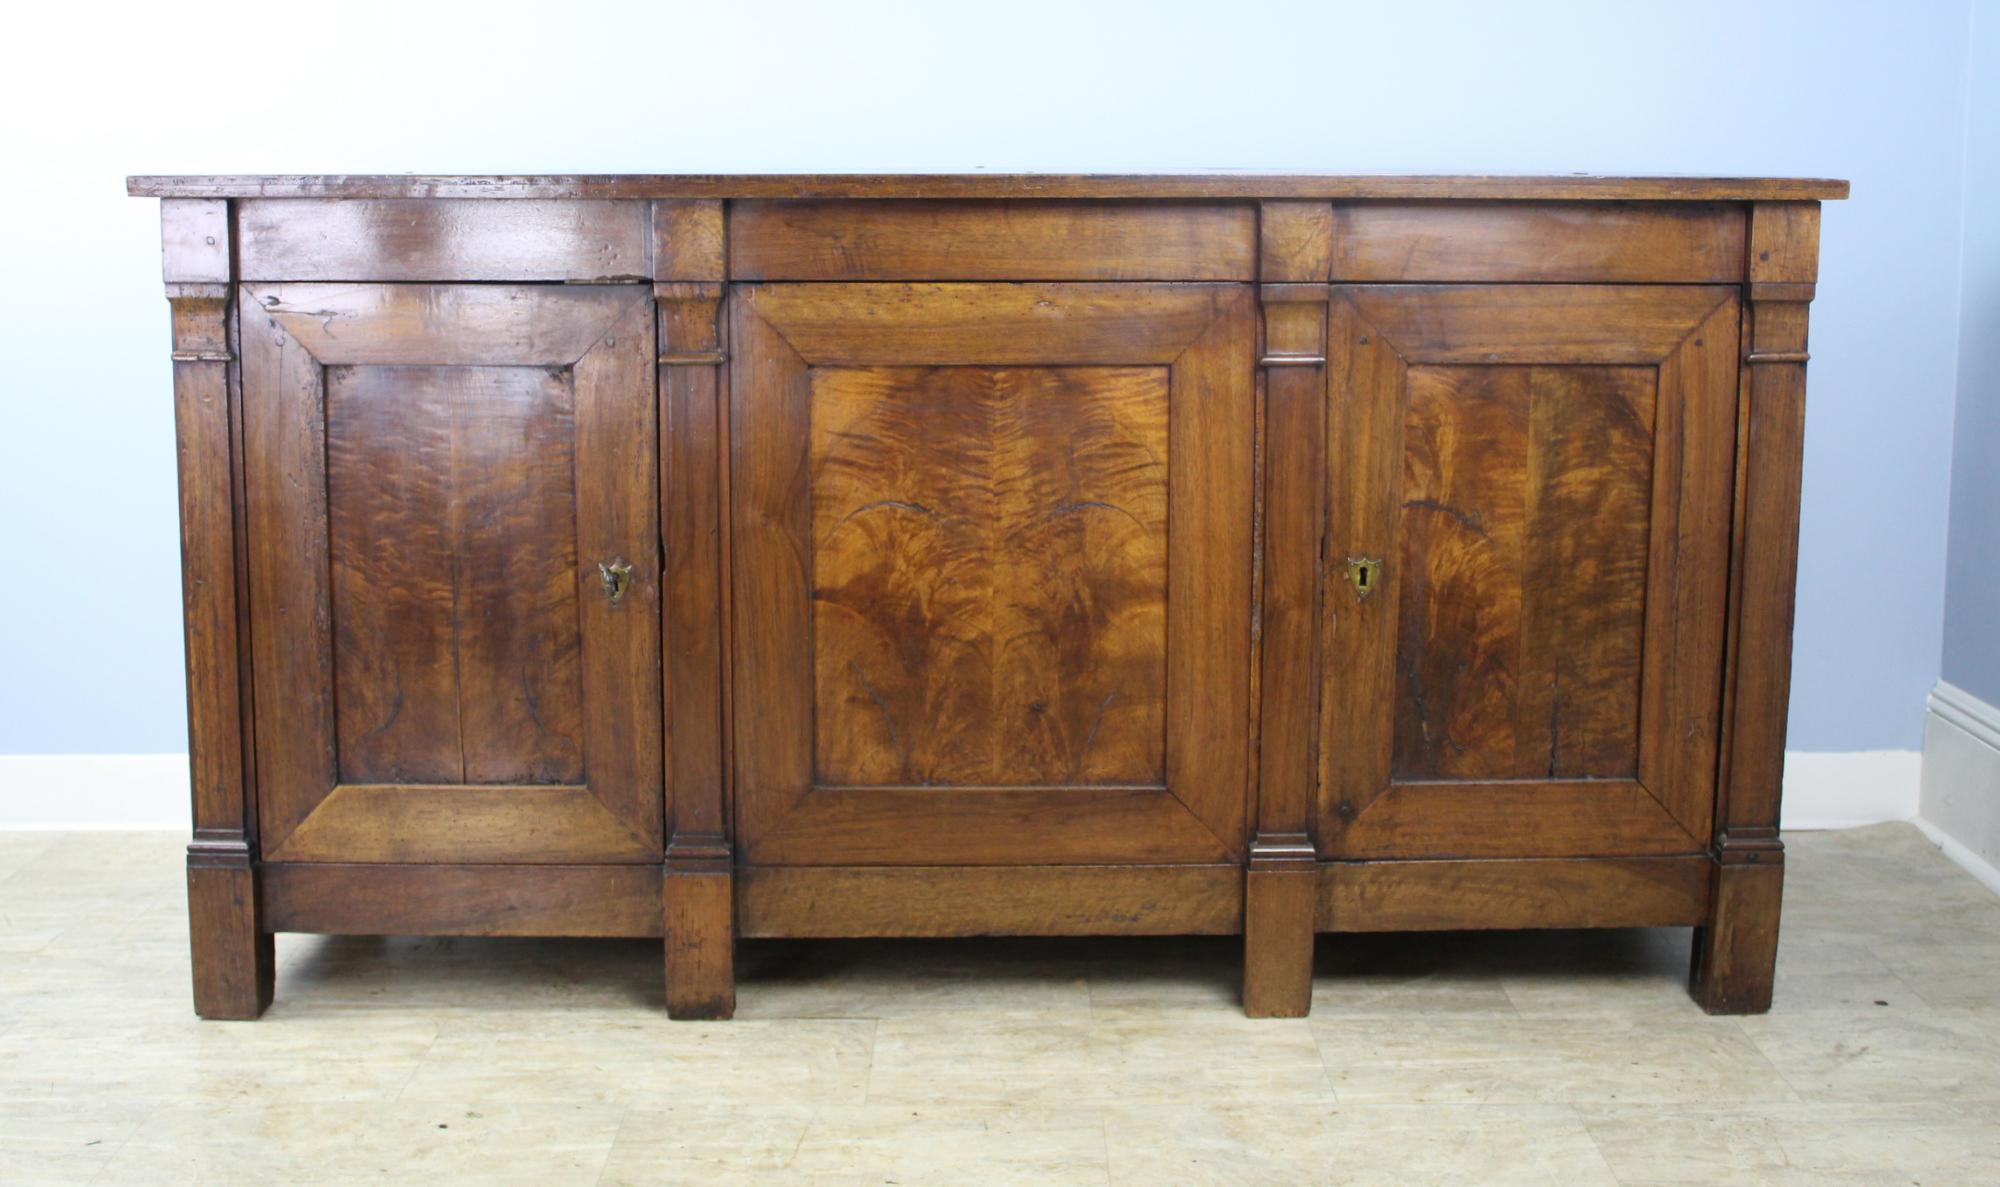 A striking walnut three-door enfilade from France's Directoire period. Beautifully and dramatically grained wood and an imposing silhouette. Both the single and double doored sides open to a wide, deep cupboard with a single shelf. Nicely mitered